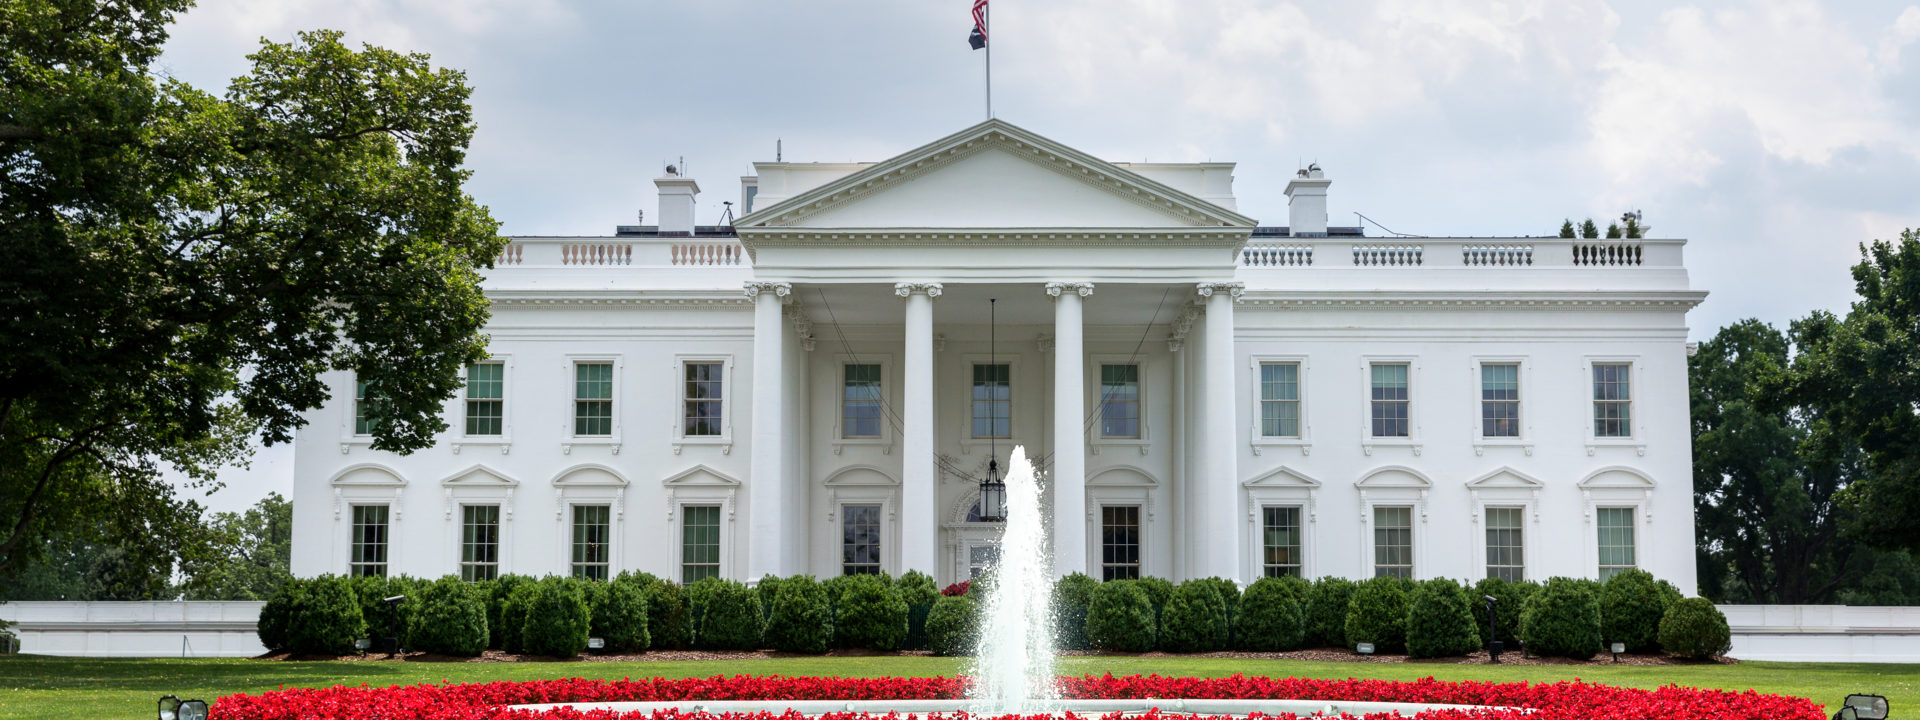 About The White House – The White House